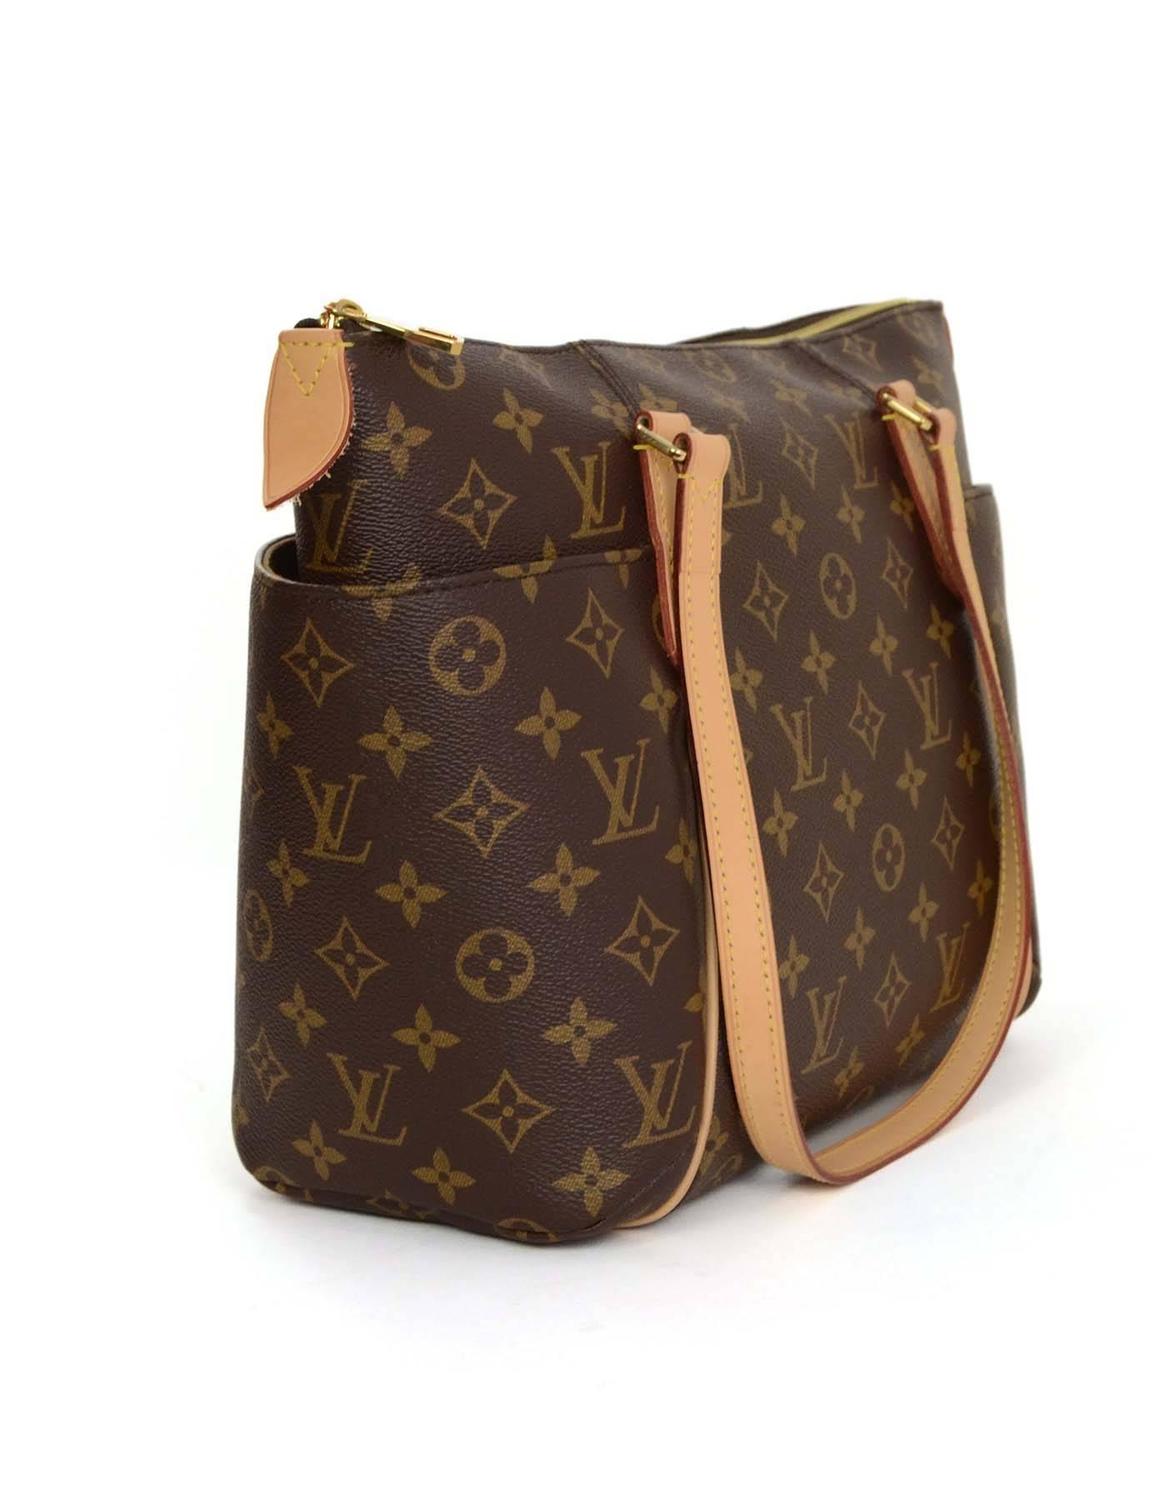 Louis Vuitton Monogram Canvas Totally PM Tote Bag GHW at 1stdibs